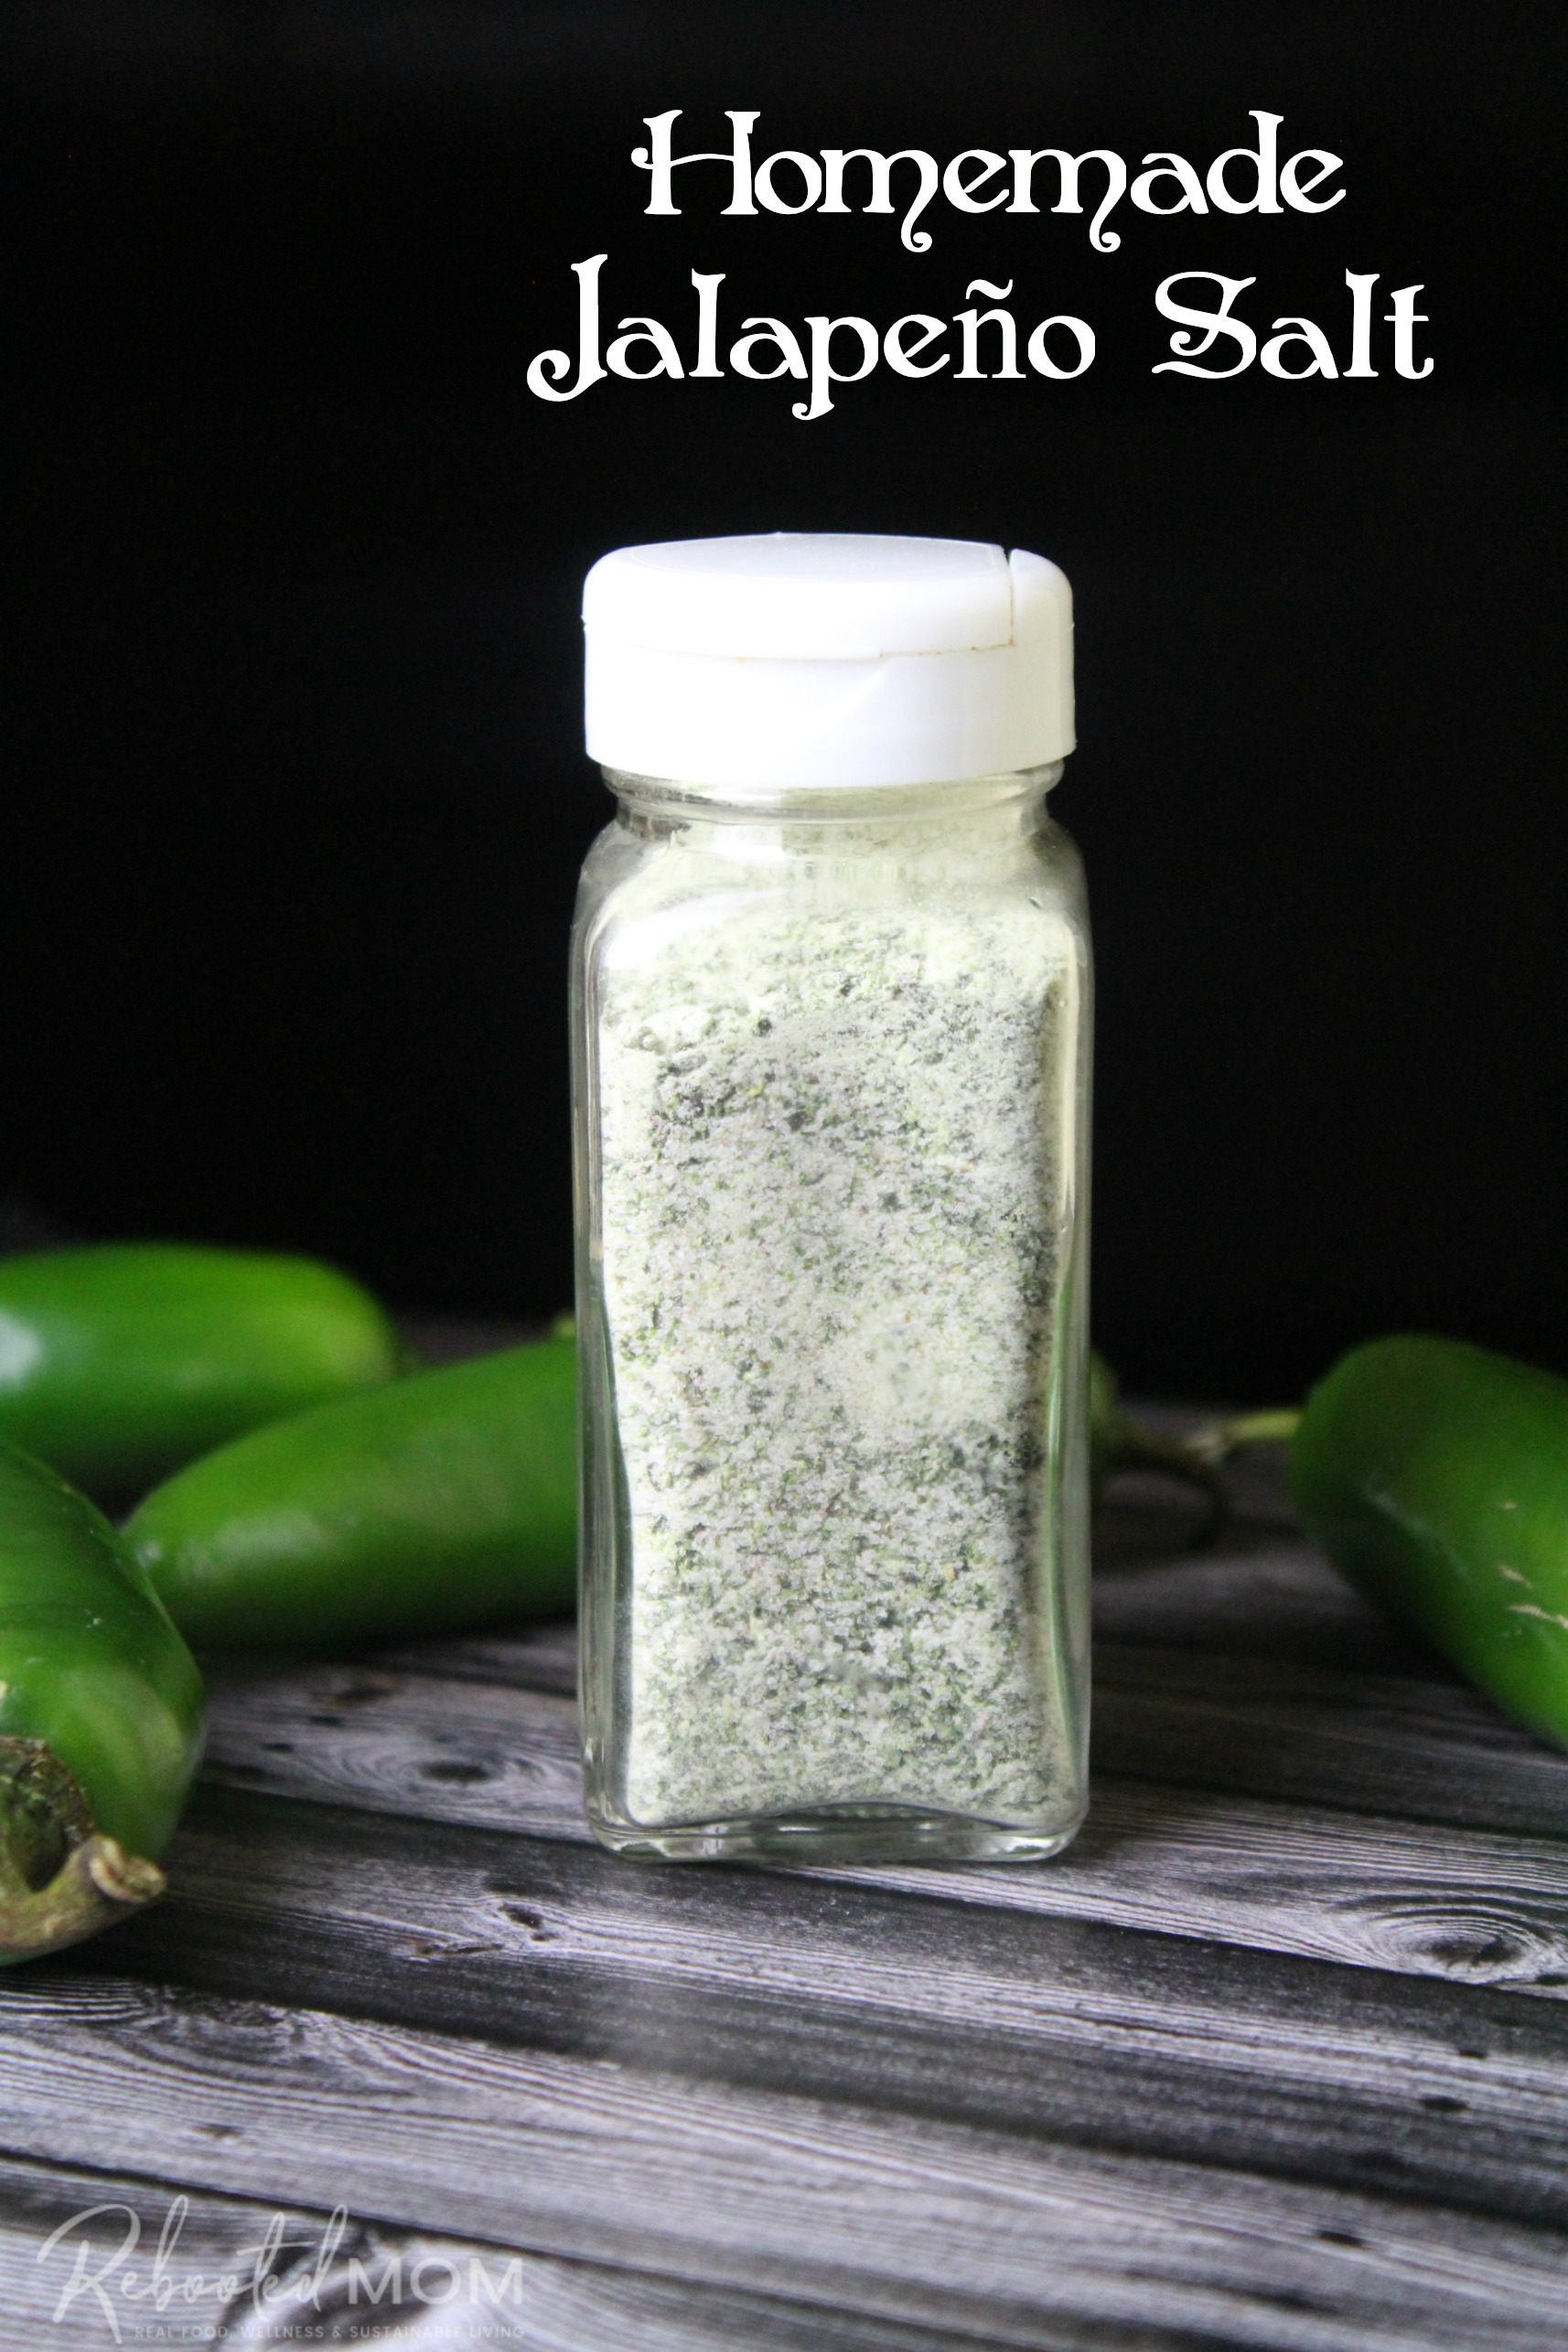 This homemade jalapeño salt recipe is easy to make at home and delicious on everything from baked potatoes, to steak and even popcorn!  #jalapeno #salt #veggiesalt #homemade #seasoning #pepper #spicy